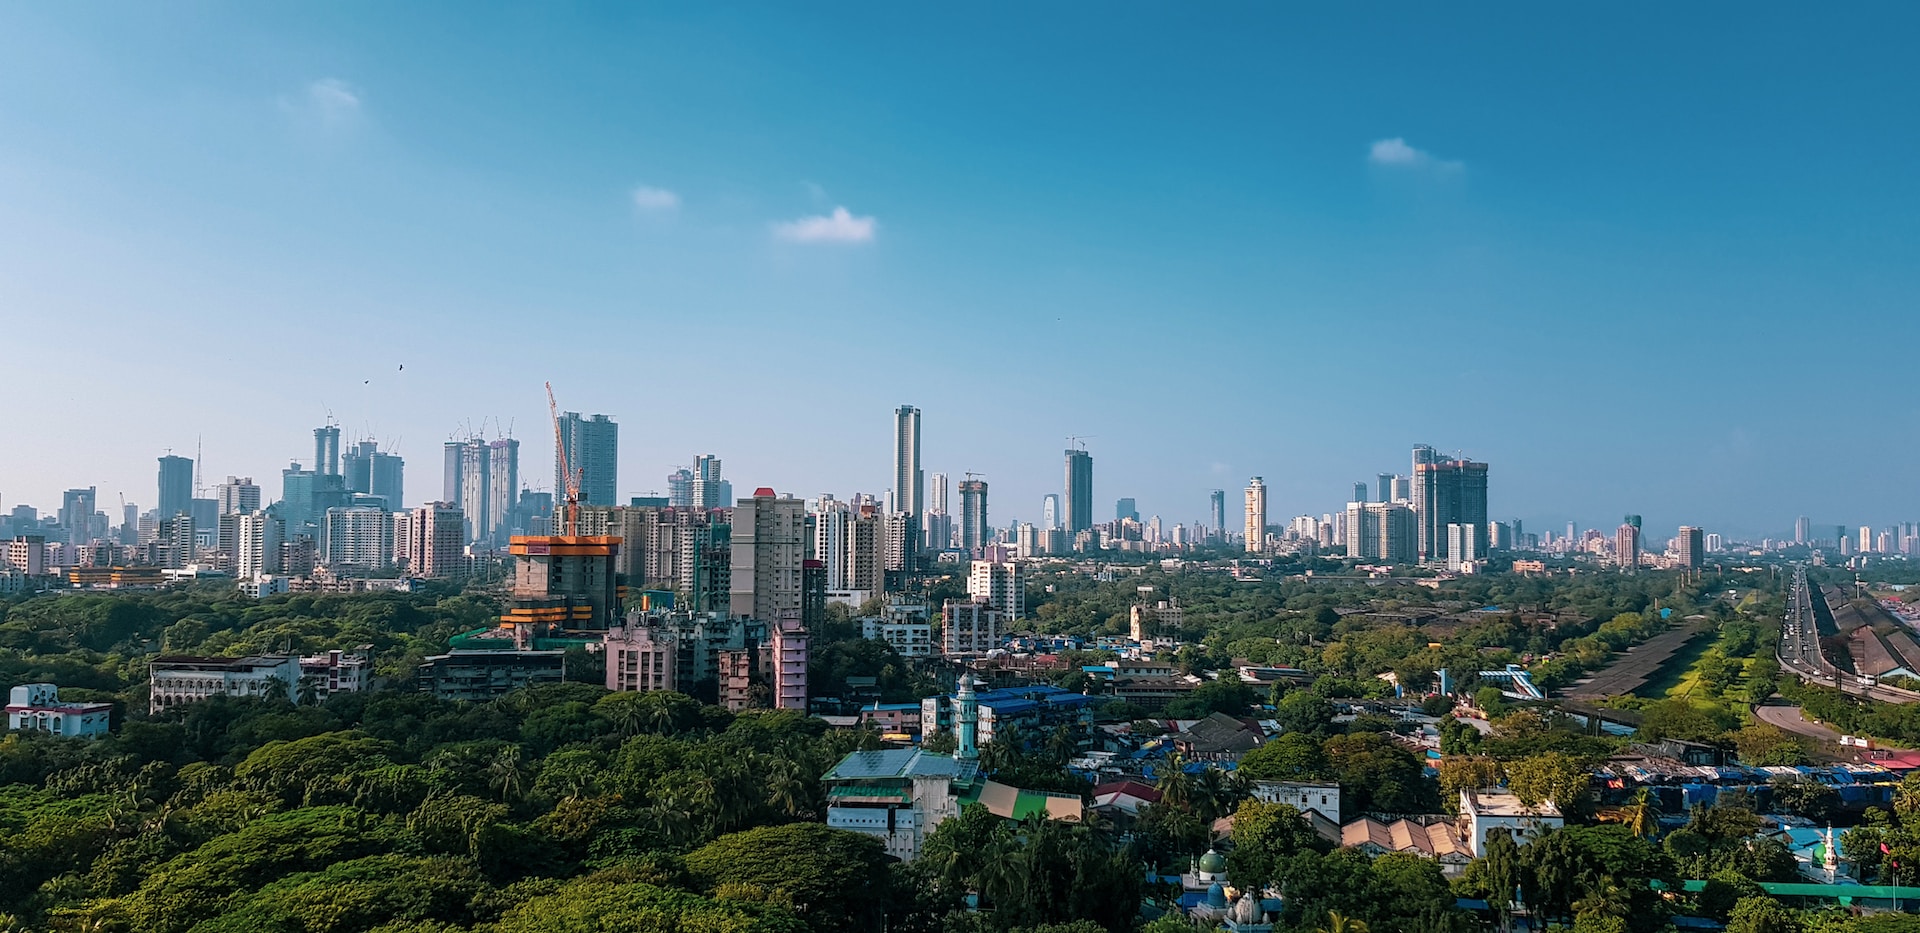 6 Reasons Why Andheri Is the Best Place to Live in Mumbai